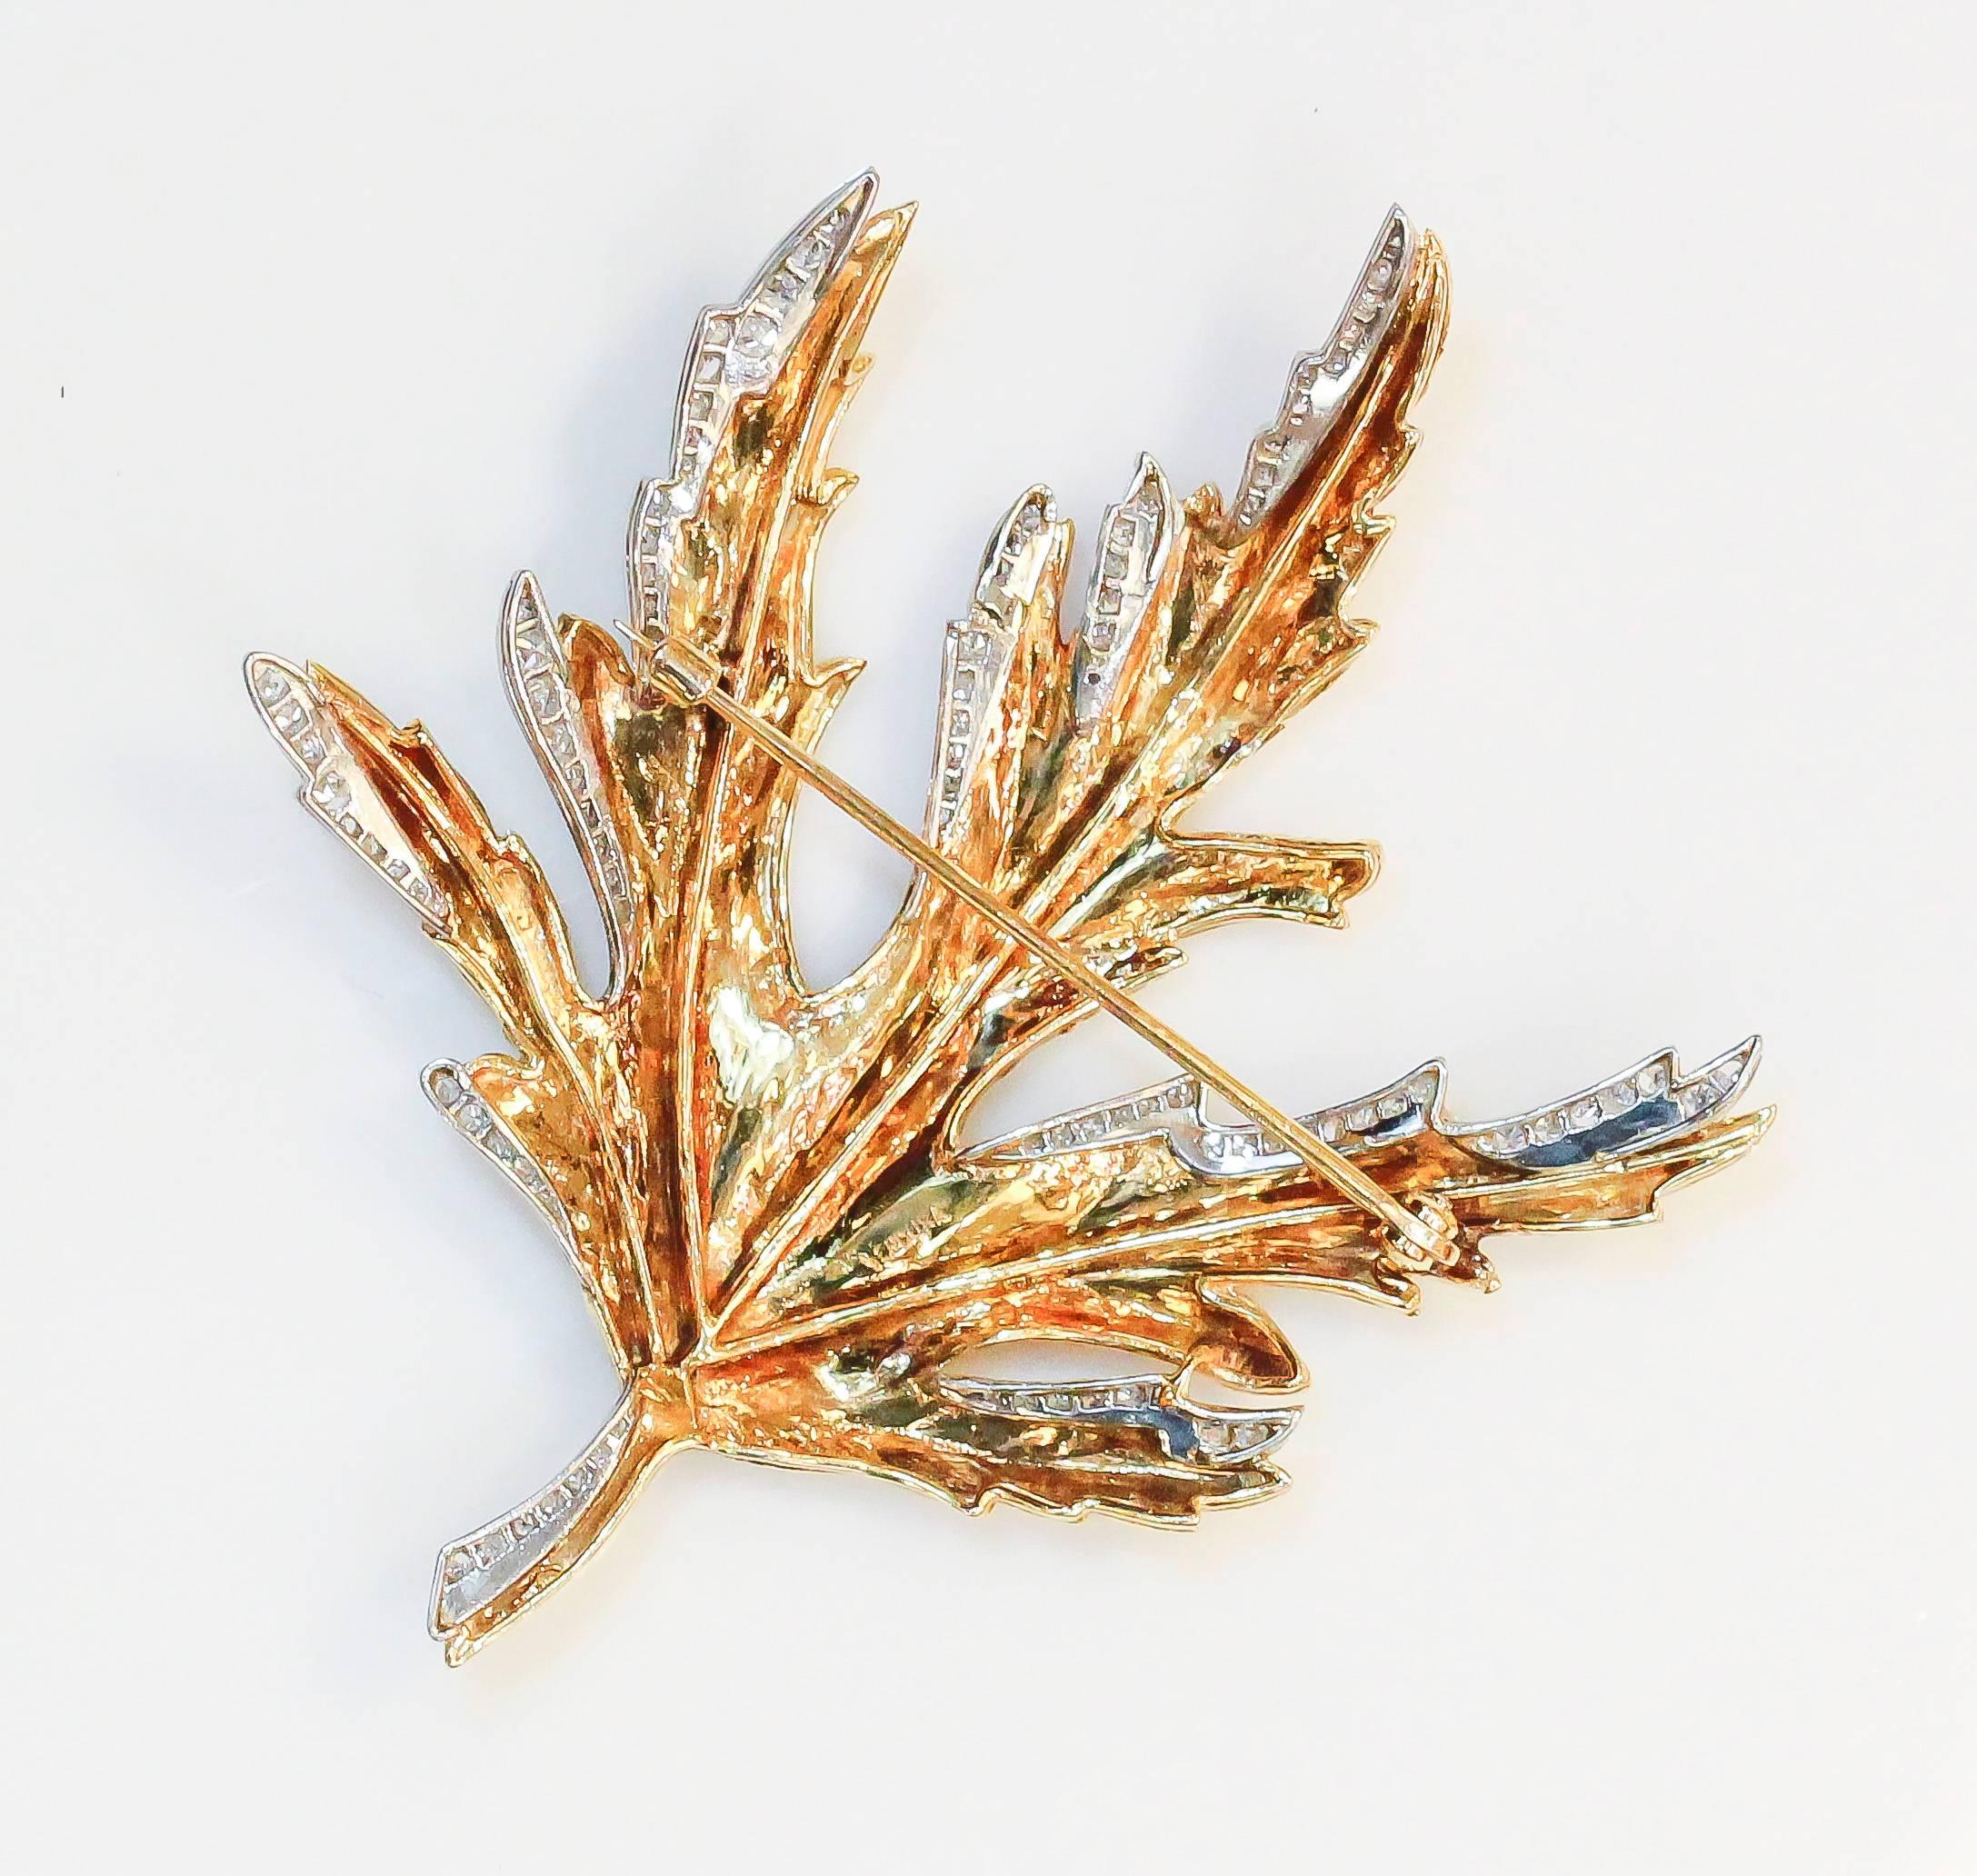 Elegant diamond, platinum and 18K yellow gold brooch by Verdura, circa 1970s. It resembles an oak leaf, adorned with high grade round cut diamonds. Beautifully made and easy to wear.

Hallmarks: Verdura